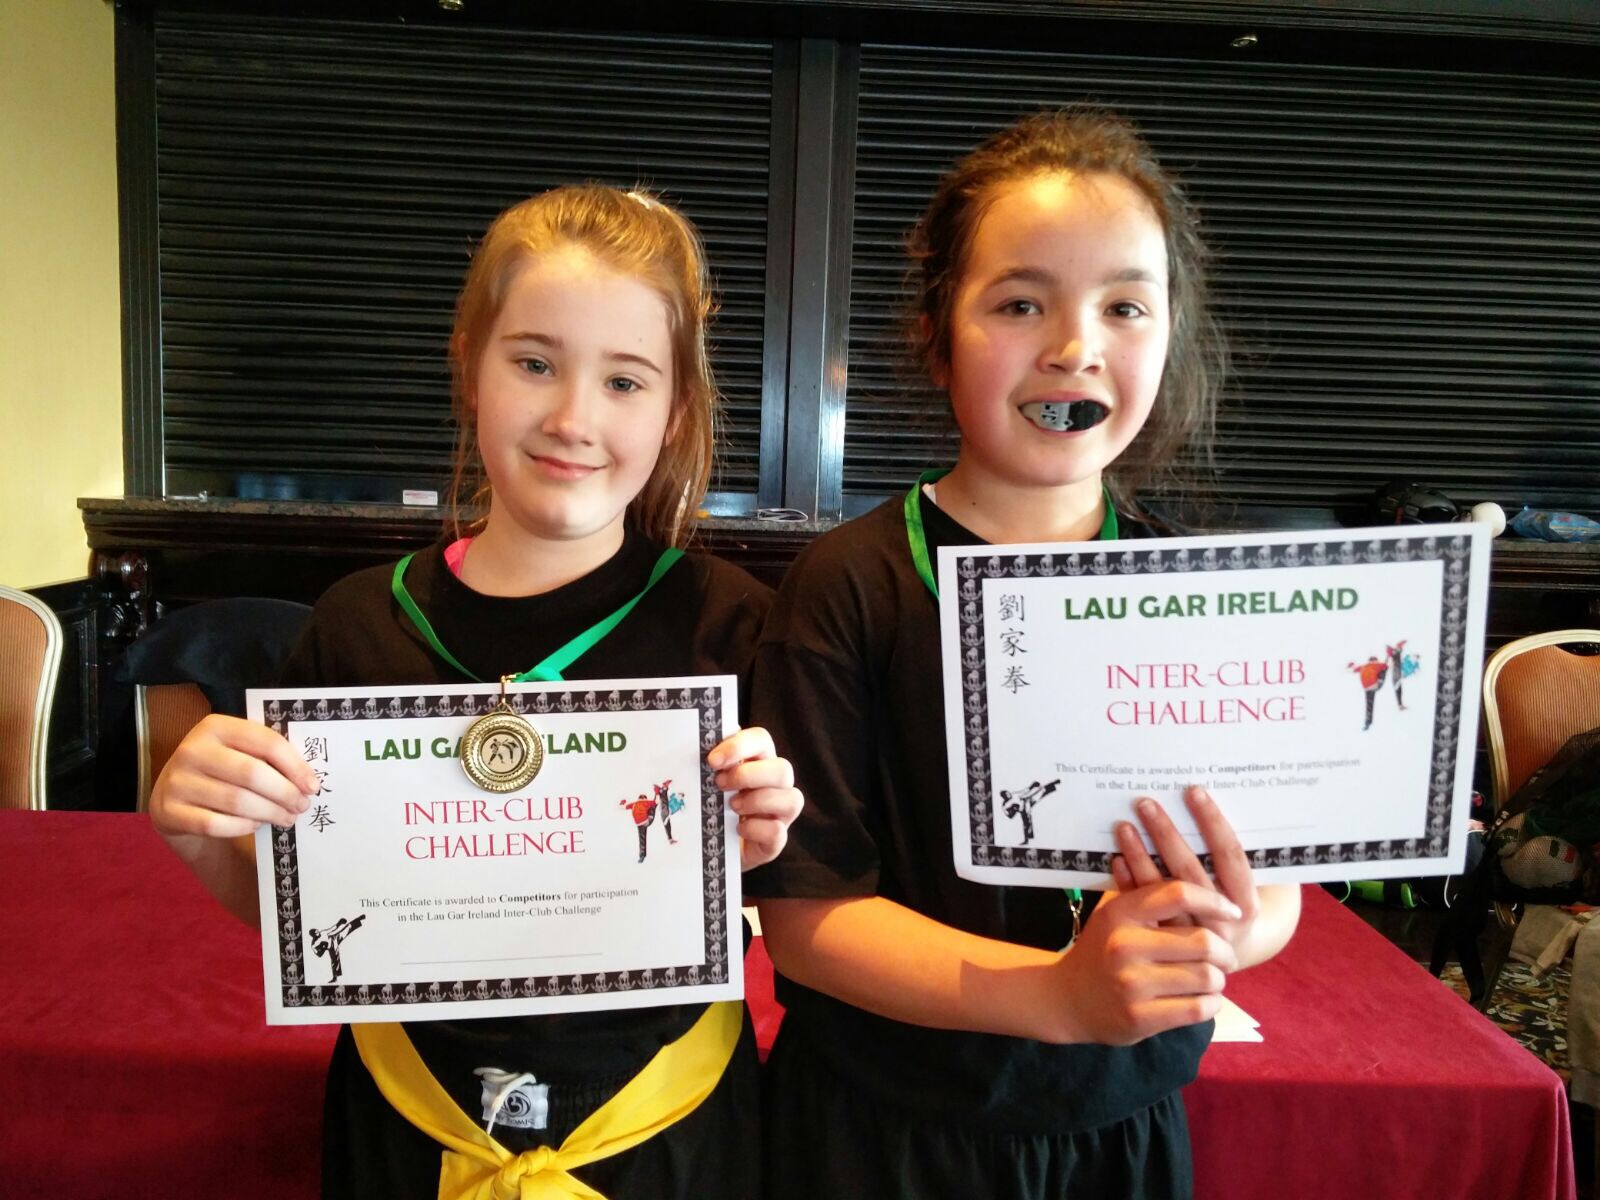 Emma Dawson 1st and Aoife Kenny 2nd, for girls under 12 final, at the recent Interclub Competition